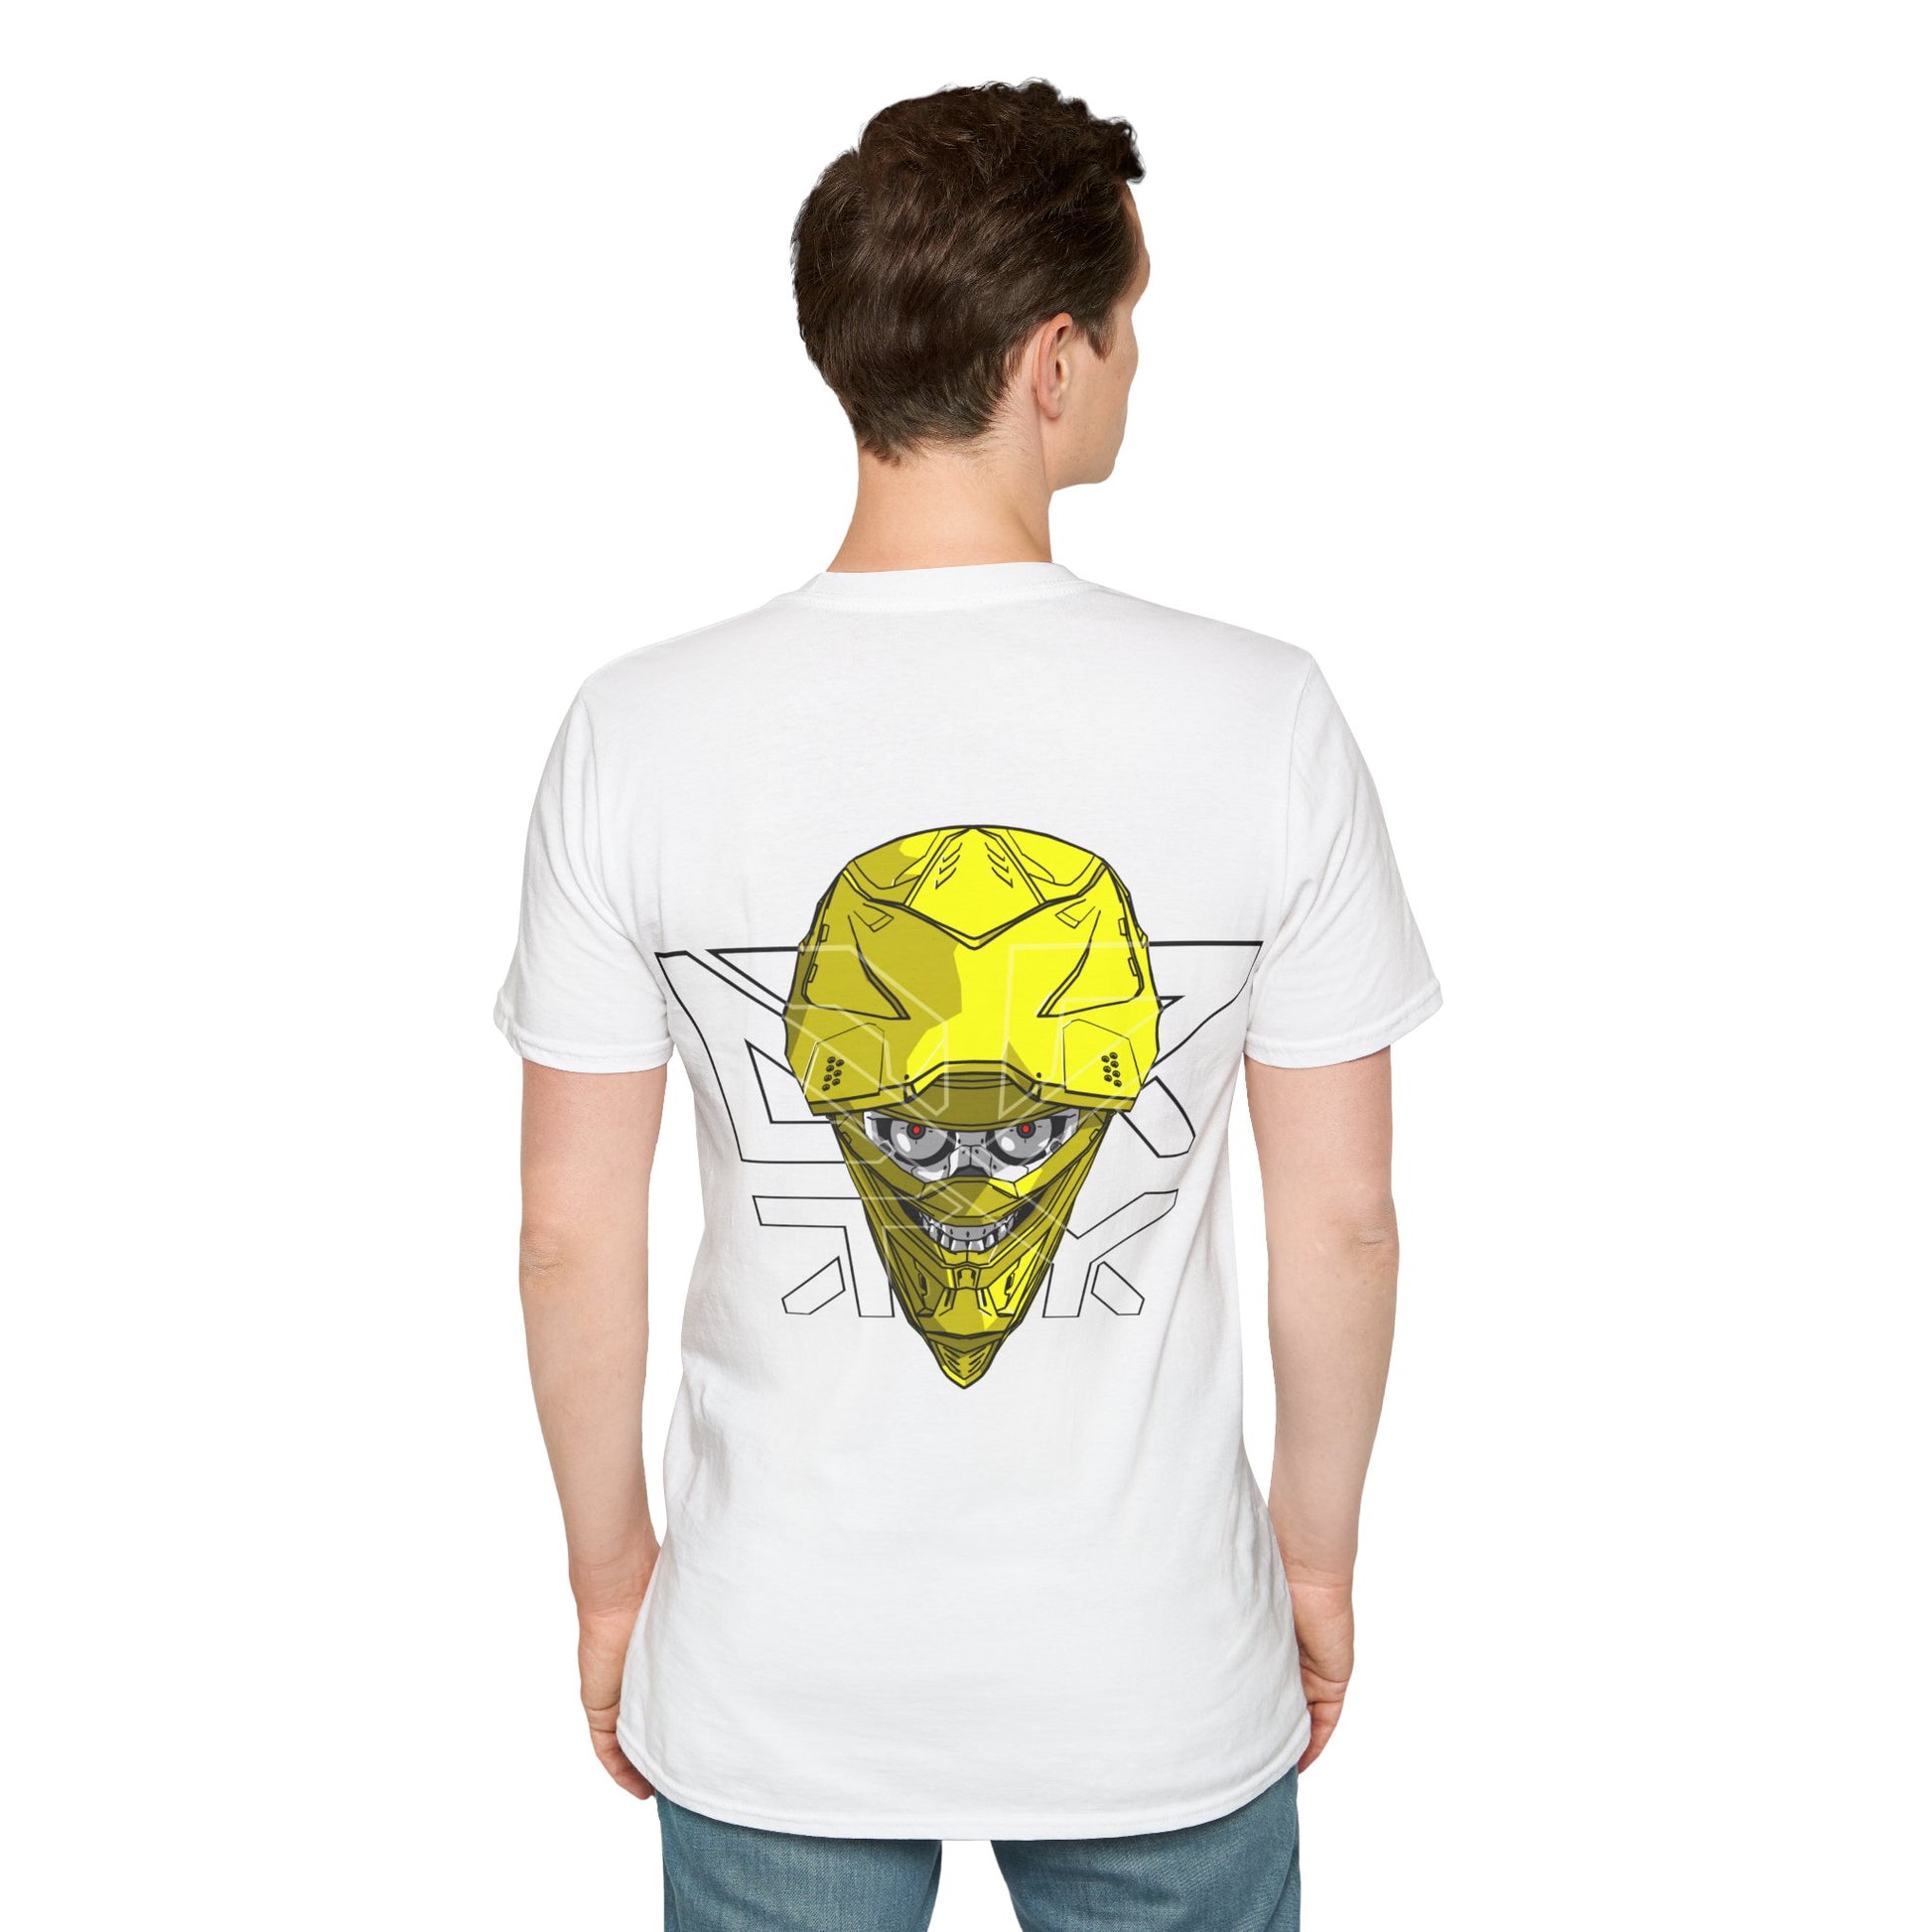 This image showcases a man wearing a back view of a T-shirt with the front view of a cyber skull inside of a motocross helmet, with a DRTY X logo over the helmet.